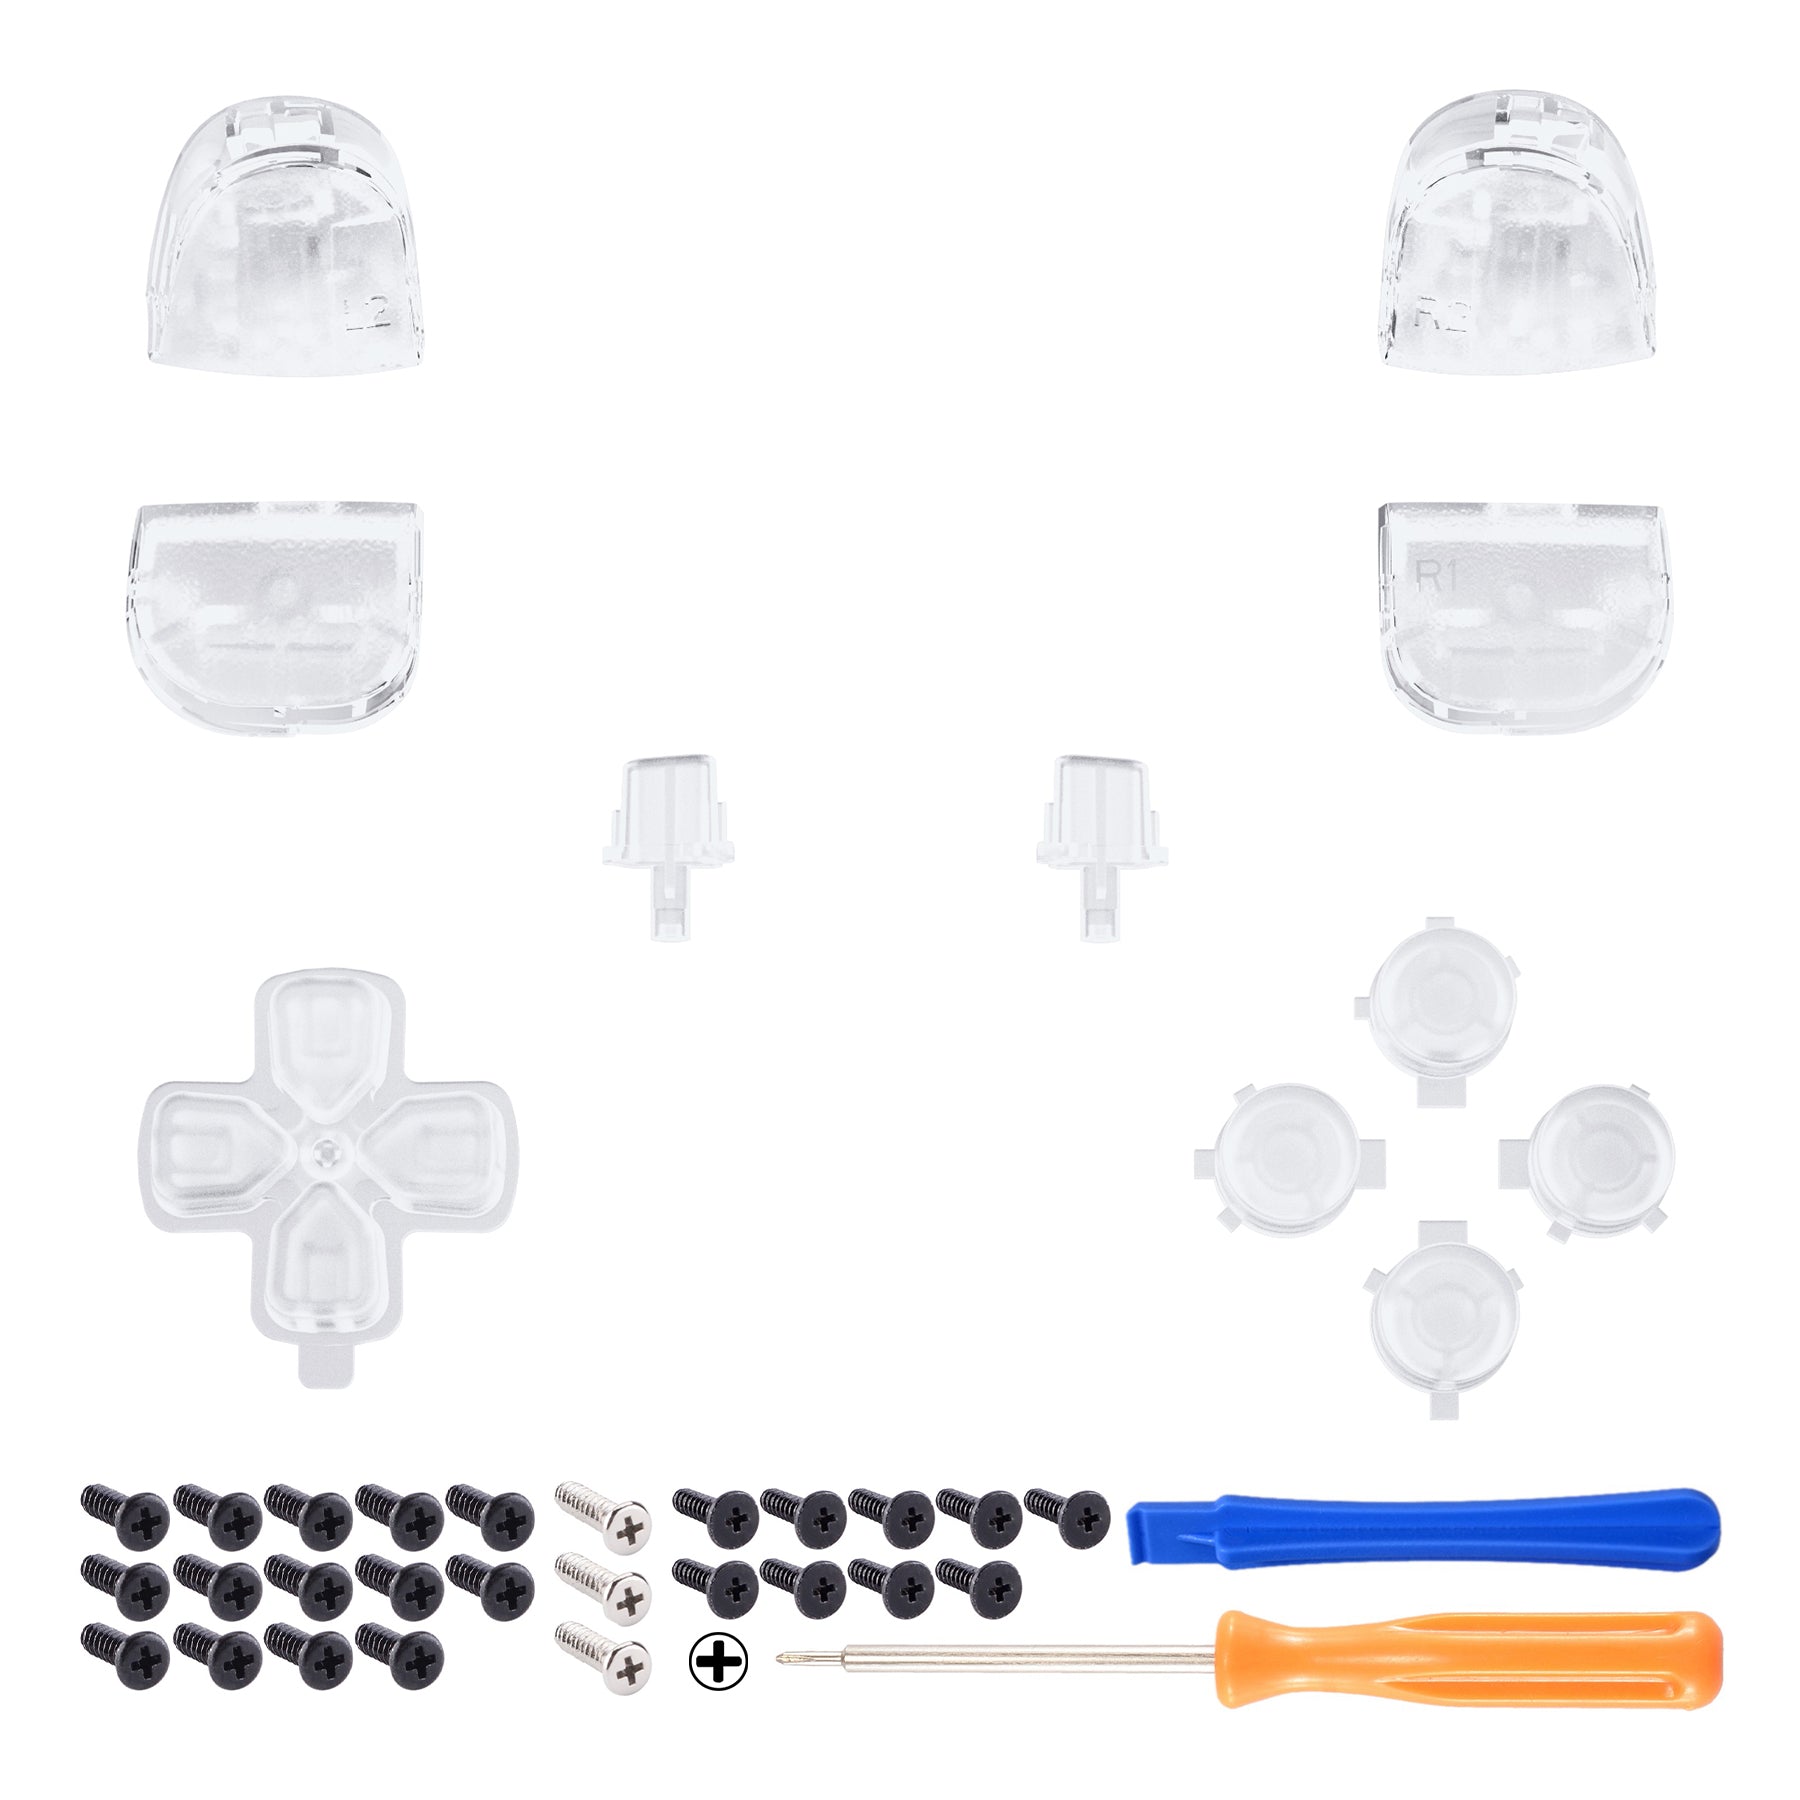 eXtremeRate Retail Replacement D-pad R1 L1 R2 L2 Triggers Share Options Face Buttons, Clear Full Set Buttons Compatible With ps5 Controller BDM-010 & BDM-020 - JPF3001G2